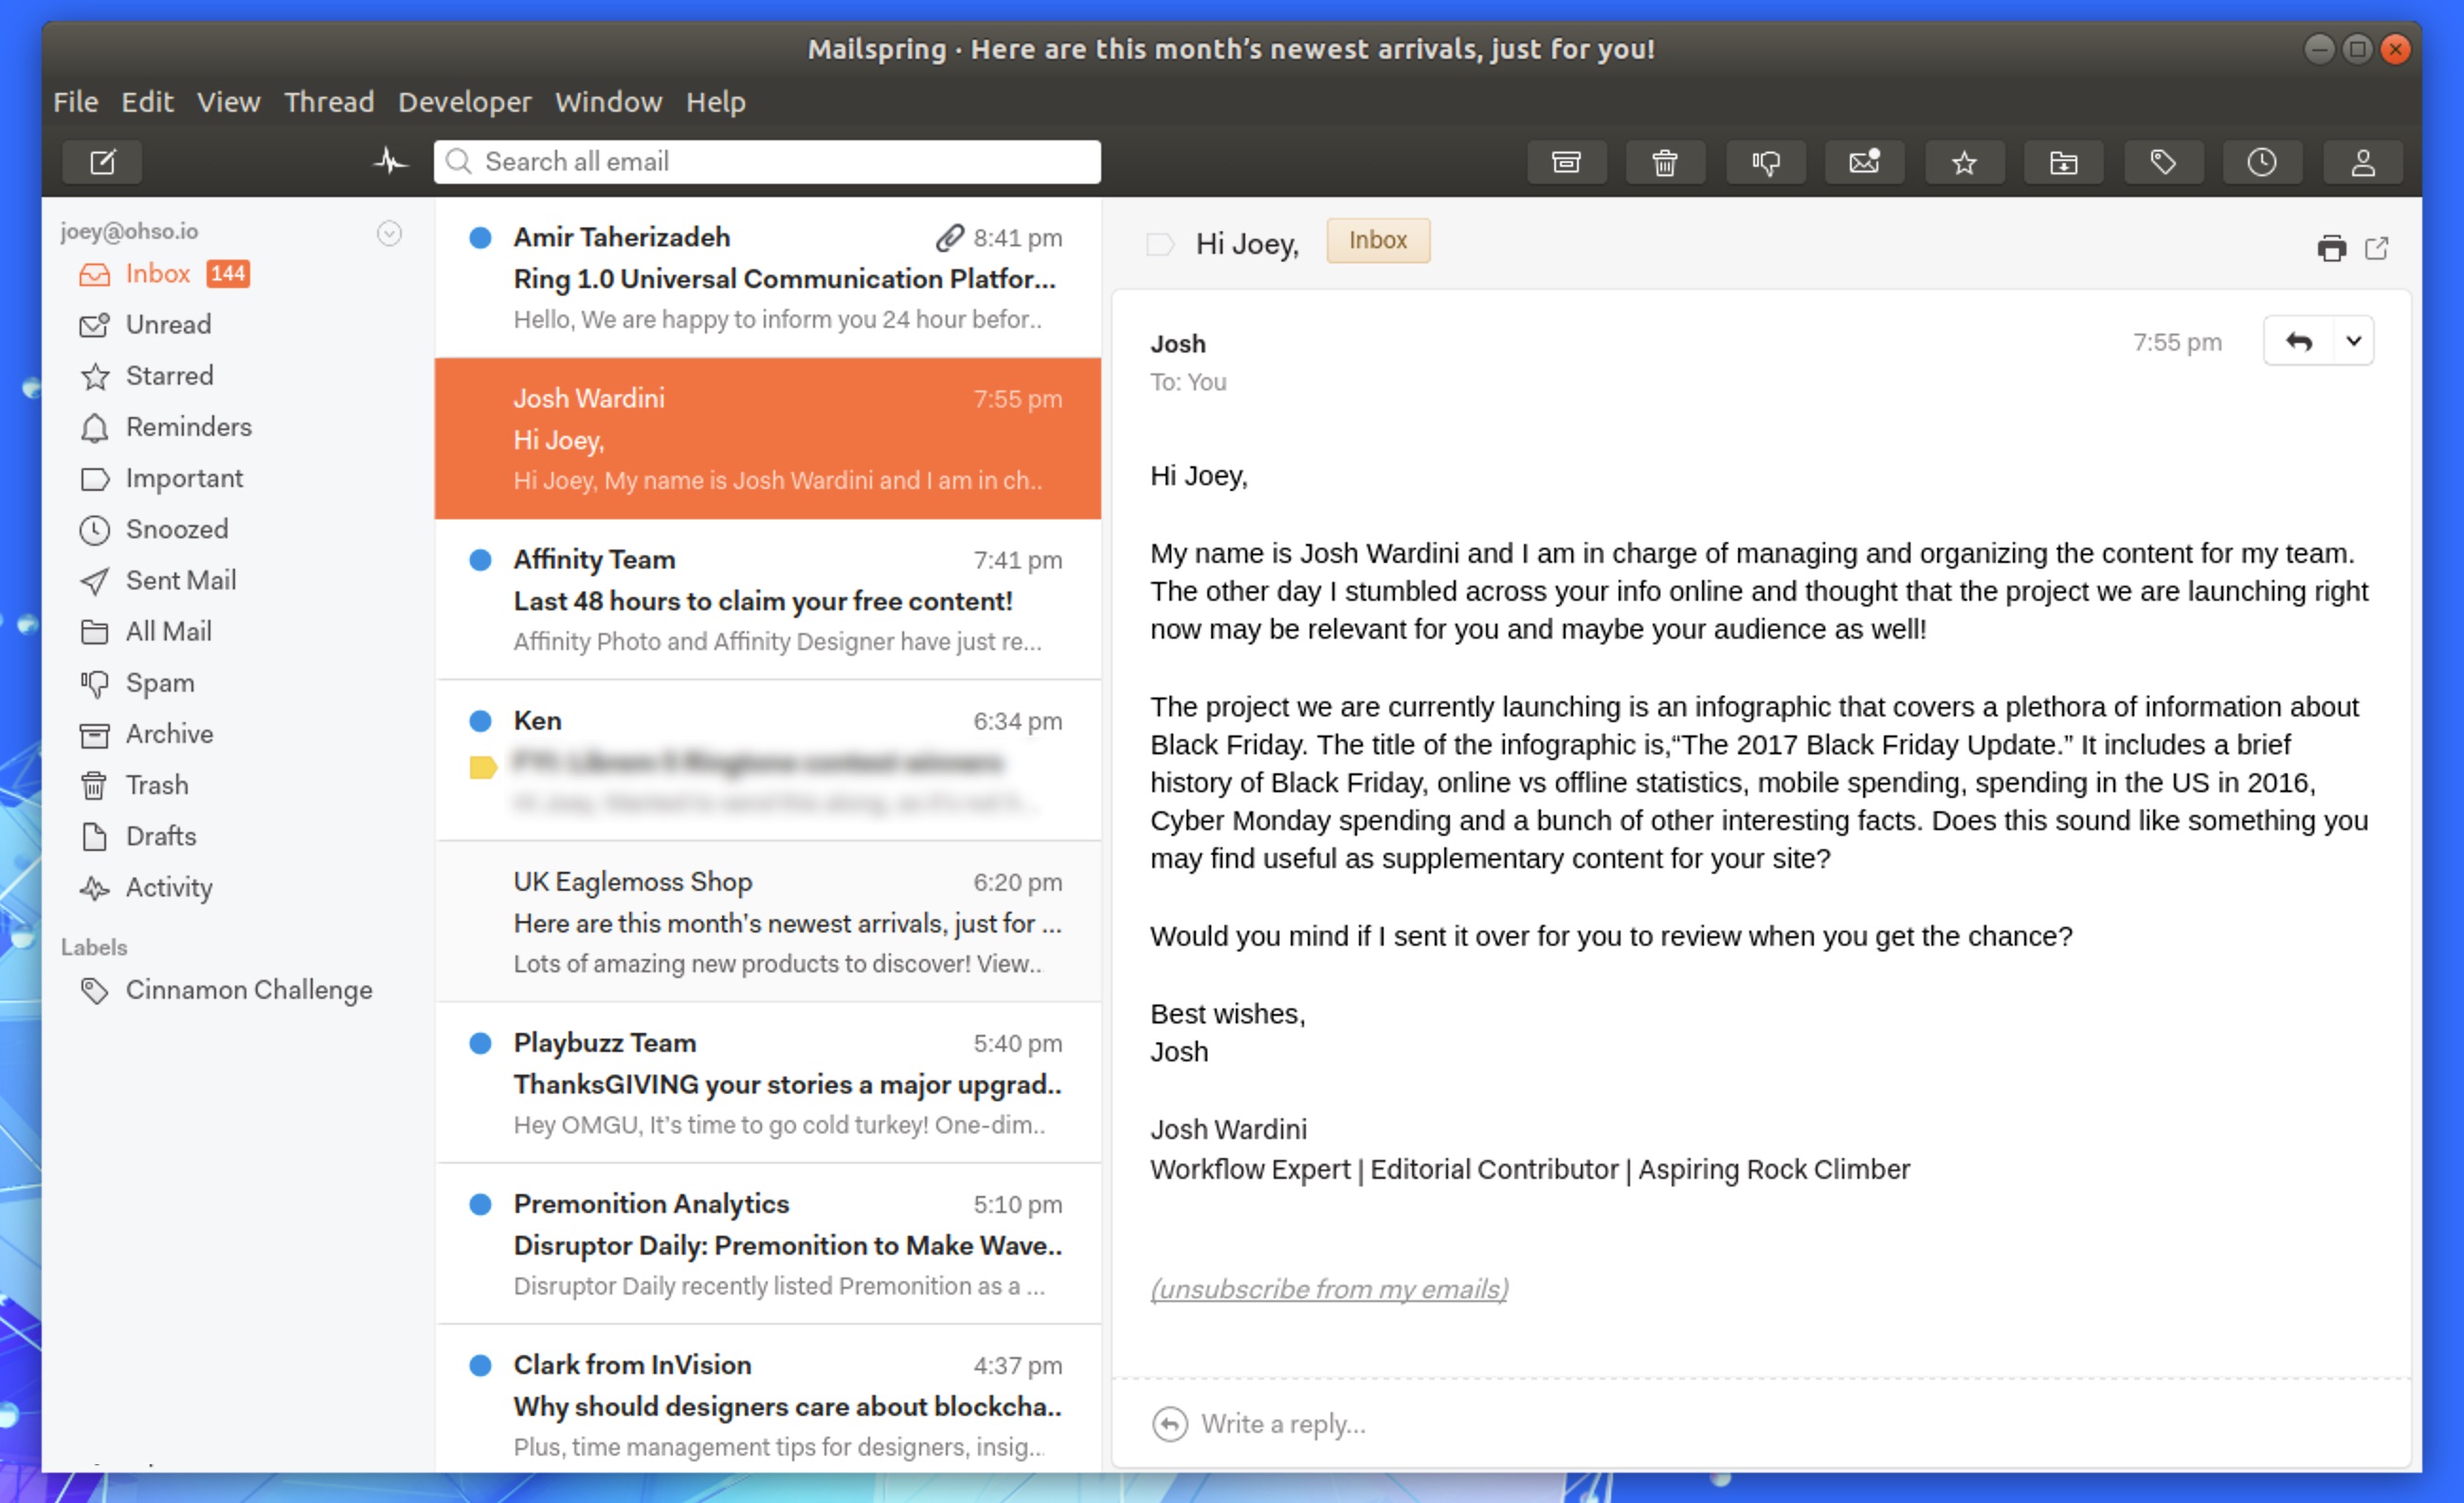 Mailspring Email Client is now available as a Snap app OMG! Ubuntu!